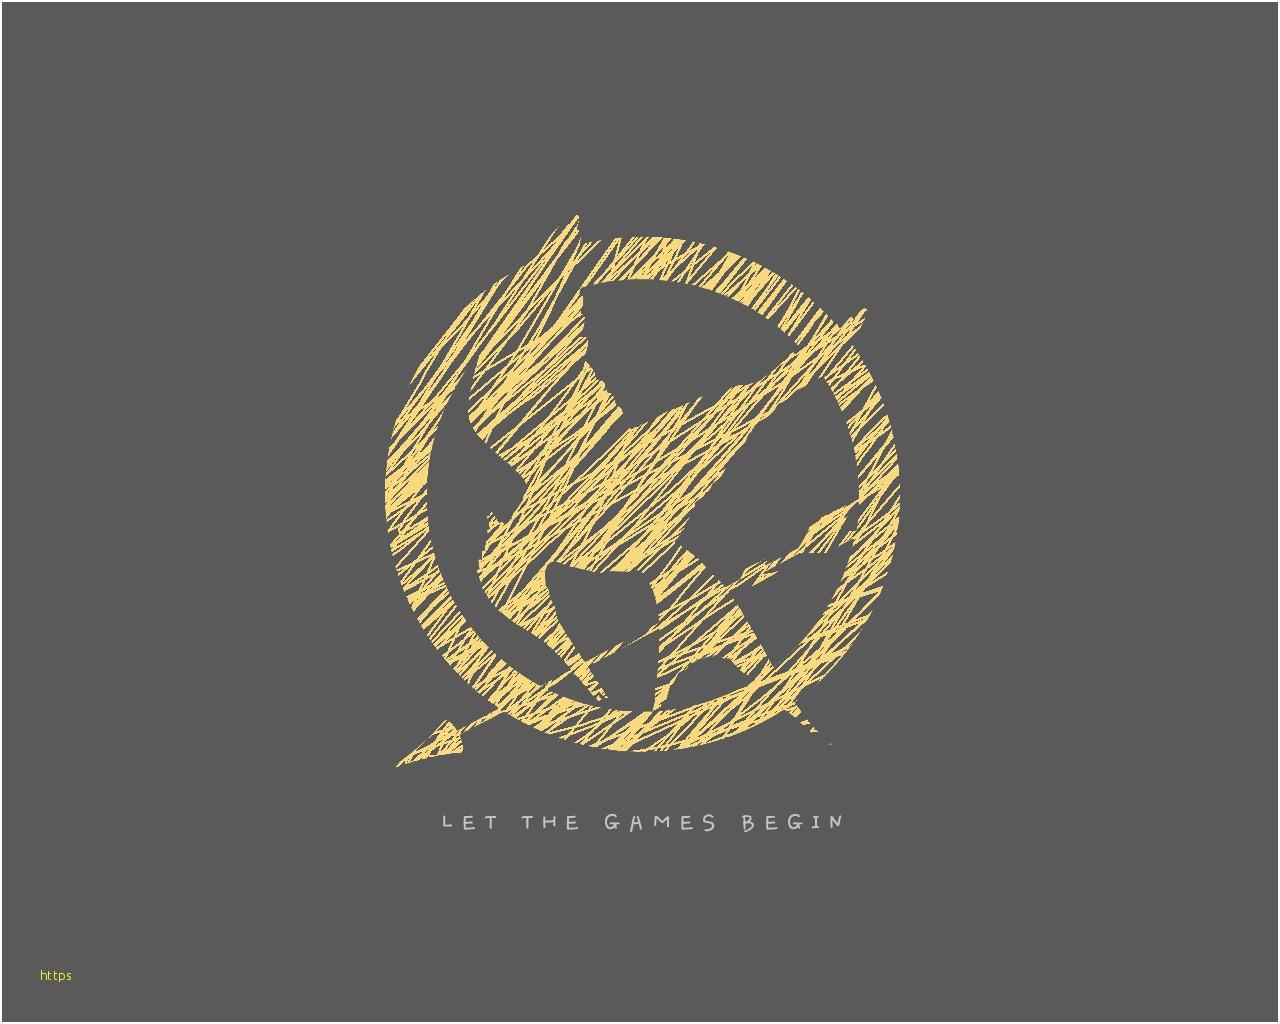 Hunger Games Wallpaper Awesome Image the Hunger Games Wallpaper